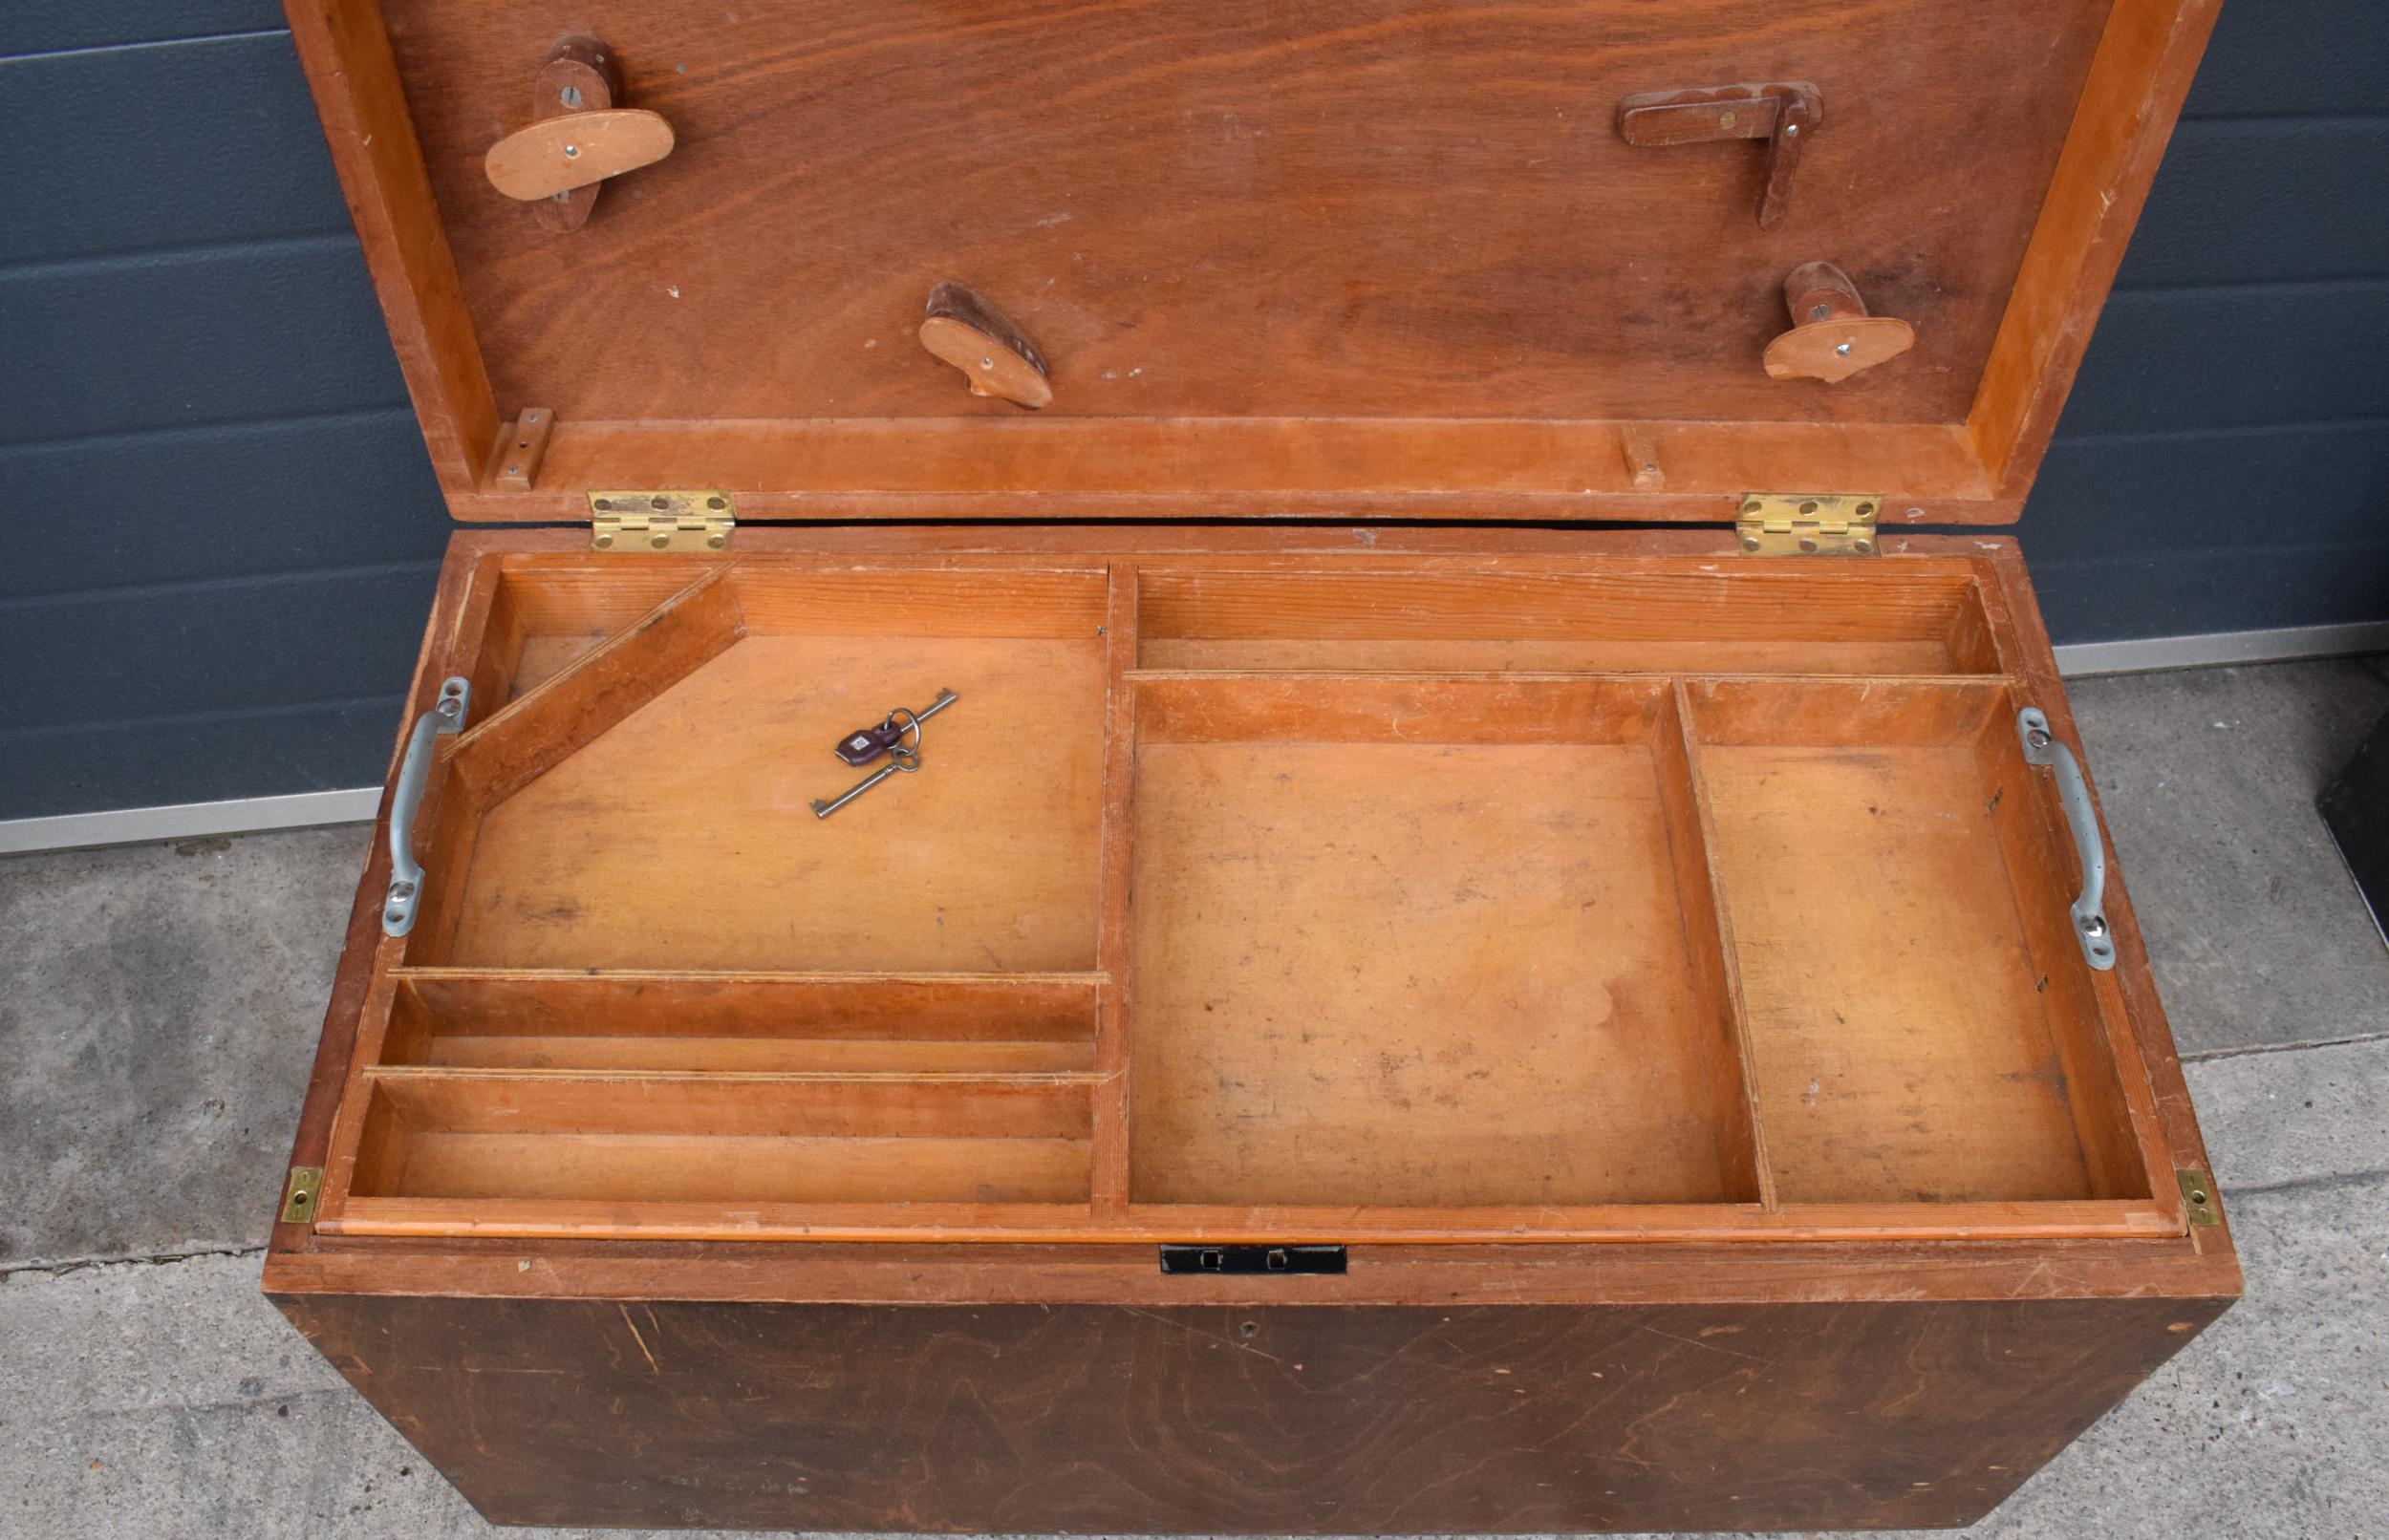 Vintage wooden tool box on caster wheels with pull out drawers, 84 x 43 x 48cm tall. - Image 5 of 6